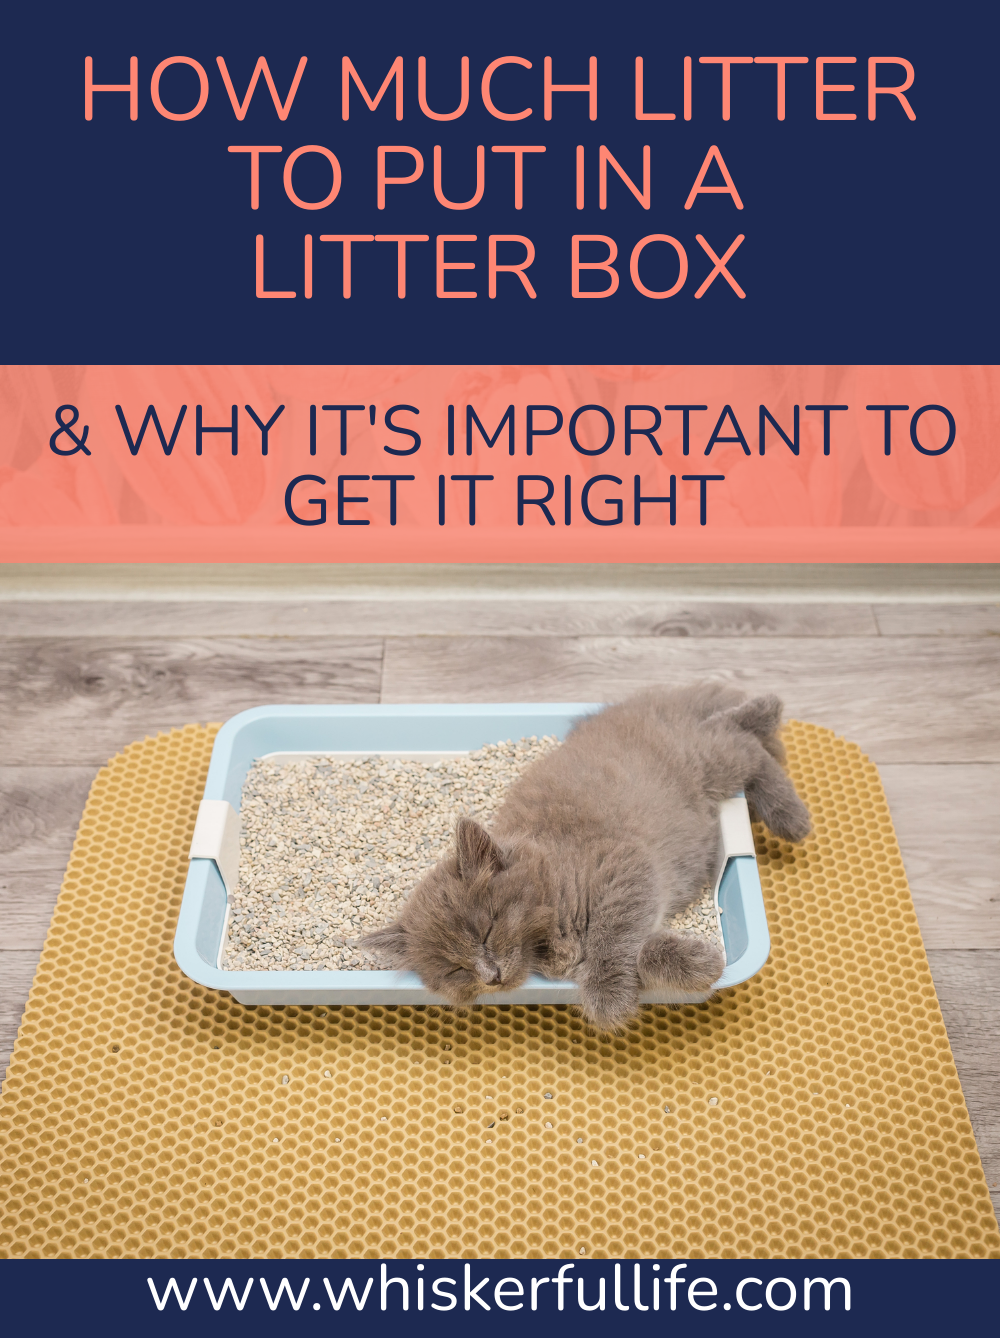 How Much Litter To Put In a Litter Box